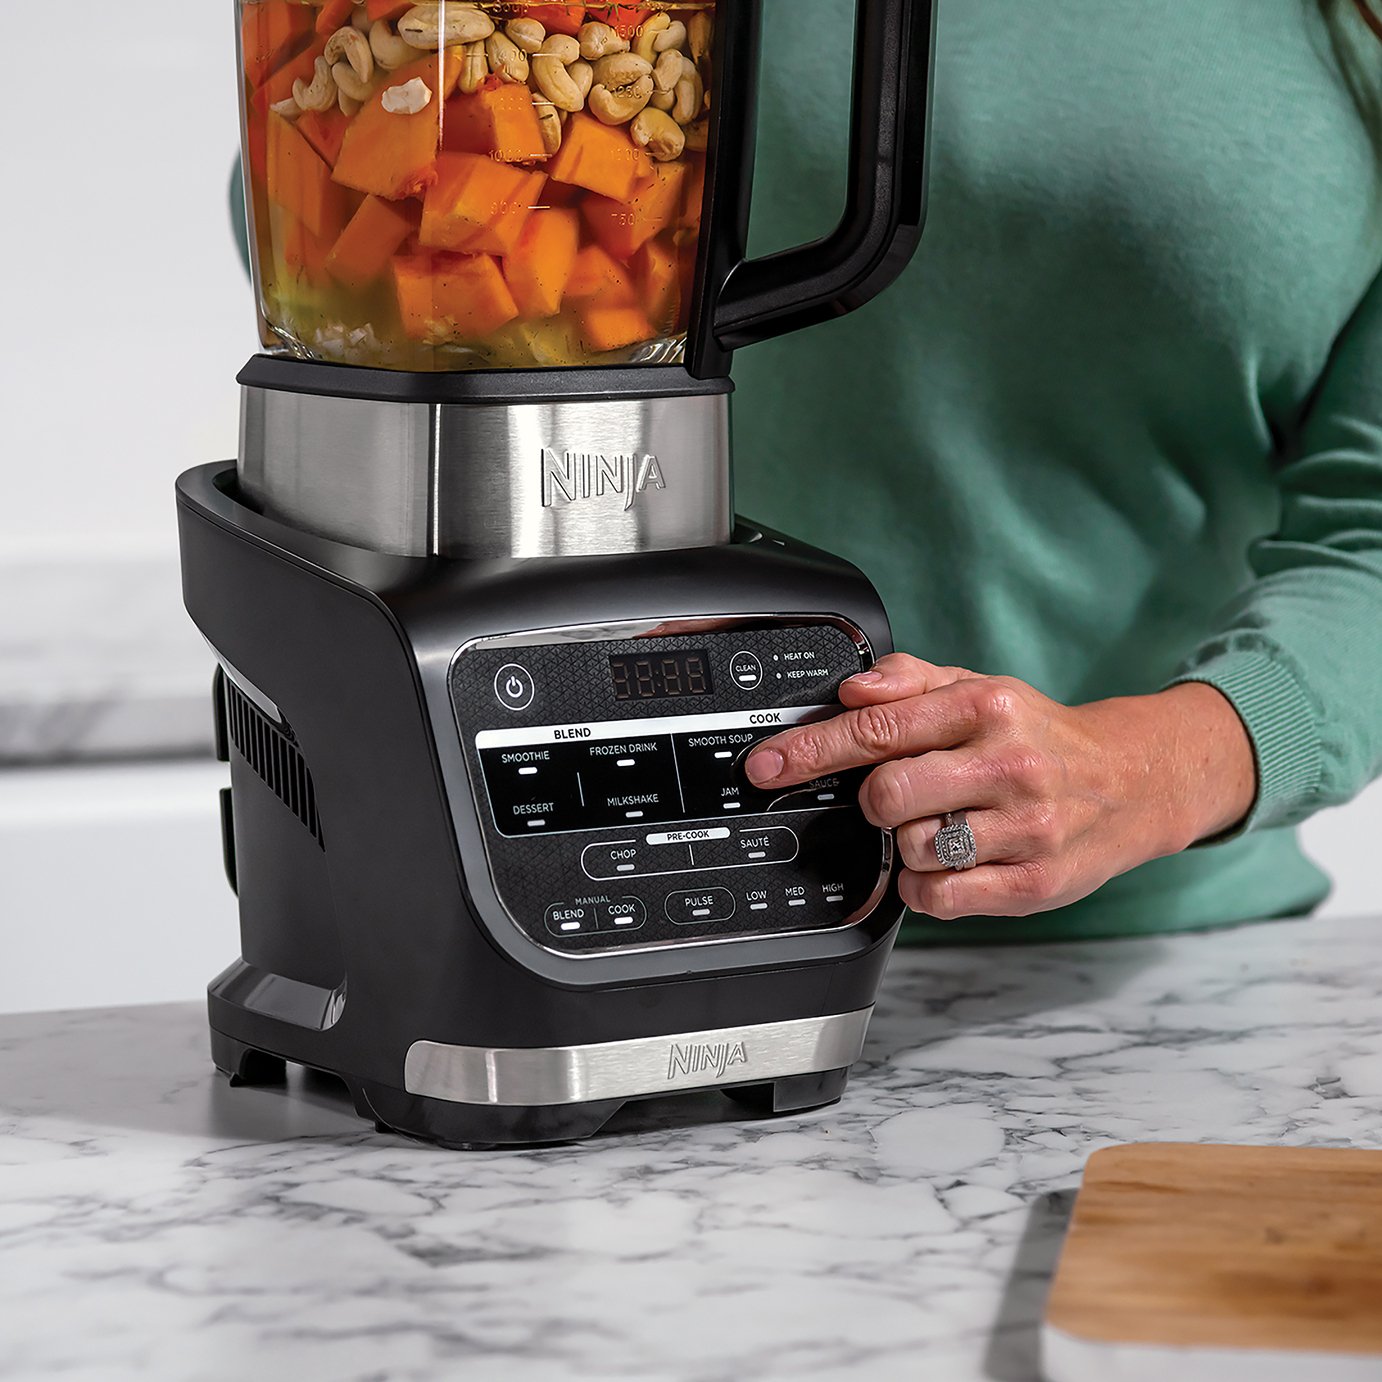 Ninja Hot and Cold Blender and Soup Maker Review